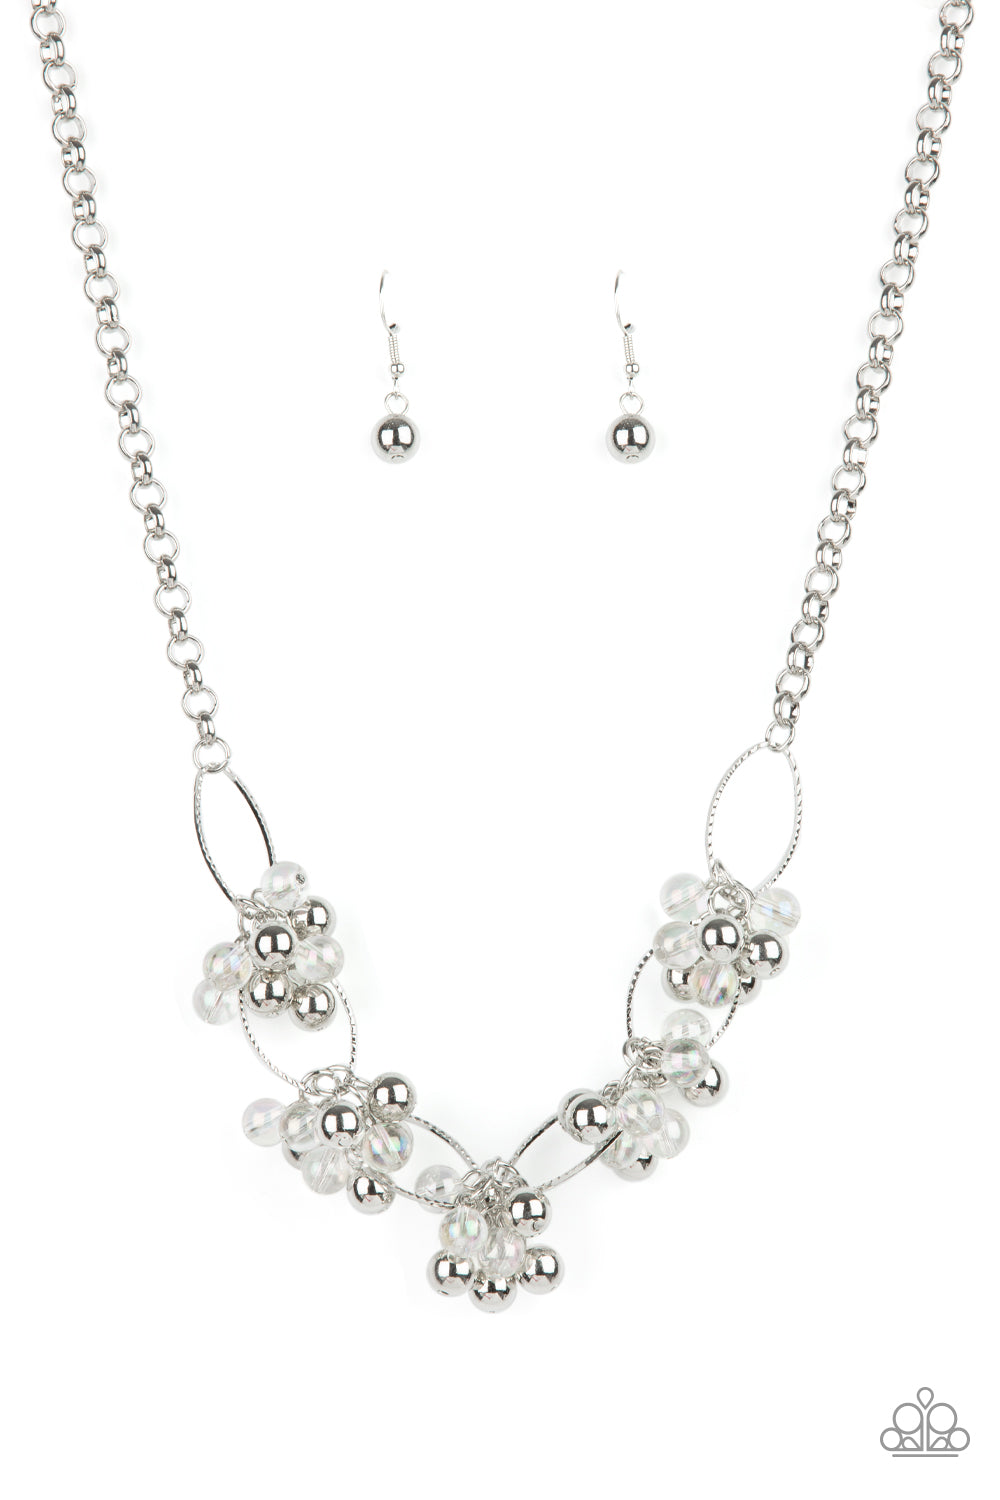 Effervescent Ensemble Multi Necklace - Paparazzi Accessories  Clusters of glassy iridescent and shiny silver beads link with textured silver ovals, creating a bubbly effervescence below the collar. Features an adjustable clasp closure.  All Paparazzi Accessories are lead free and nickel free!  Sold as one individual necklace. Includes one pair of matching earrings.